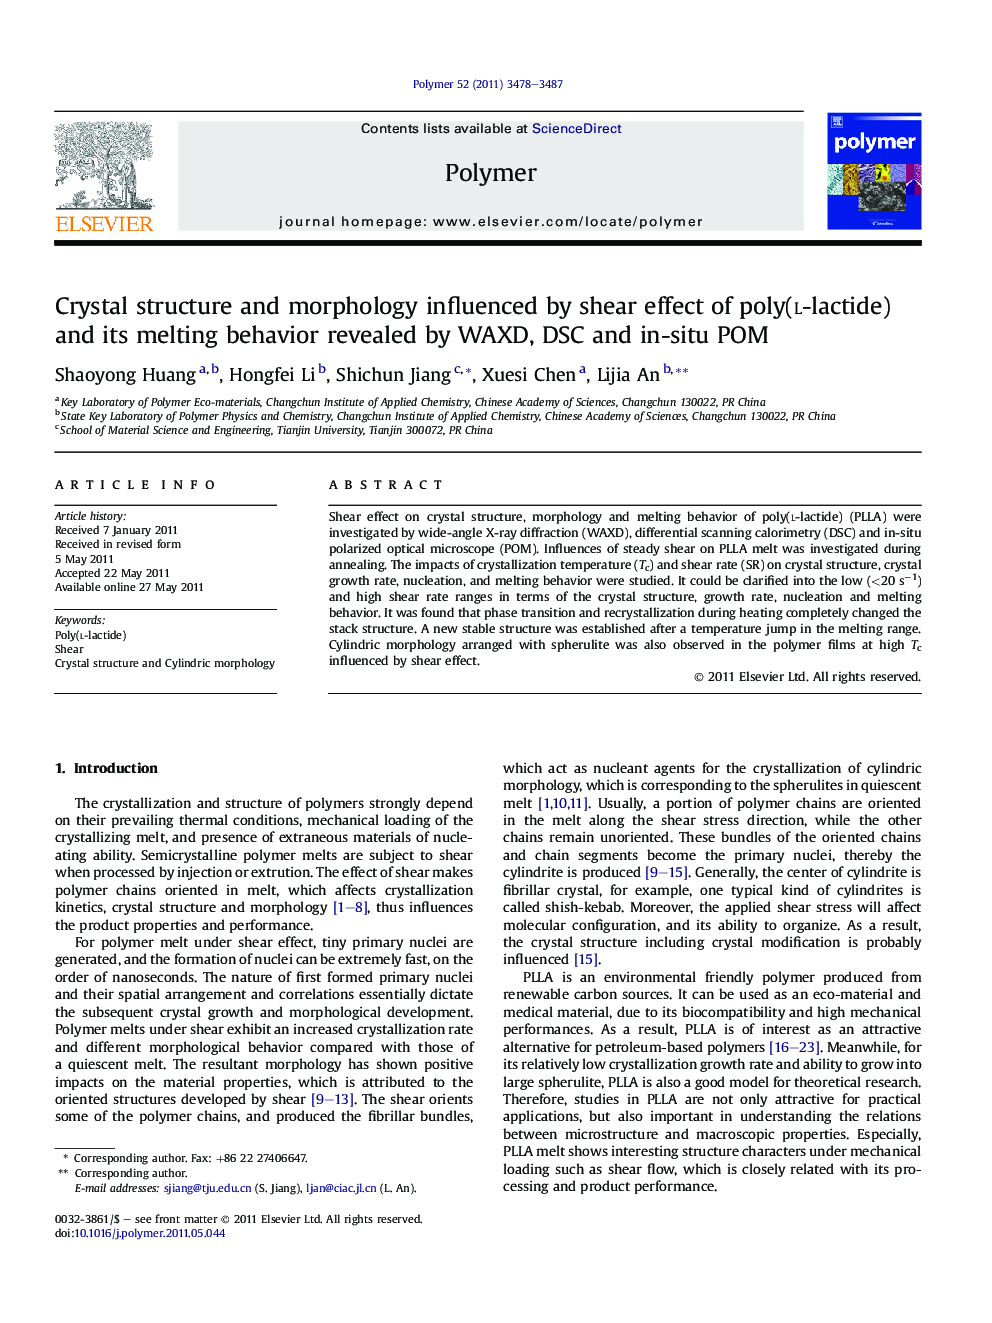 Crystal structure and morphology influenced by shear effect of poly(l-lactide) and its melting behavior revealed by WAXD, DSC and in-situ POM